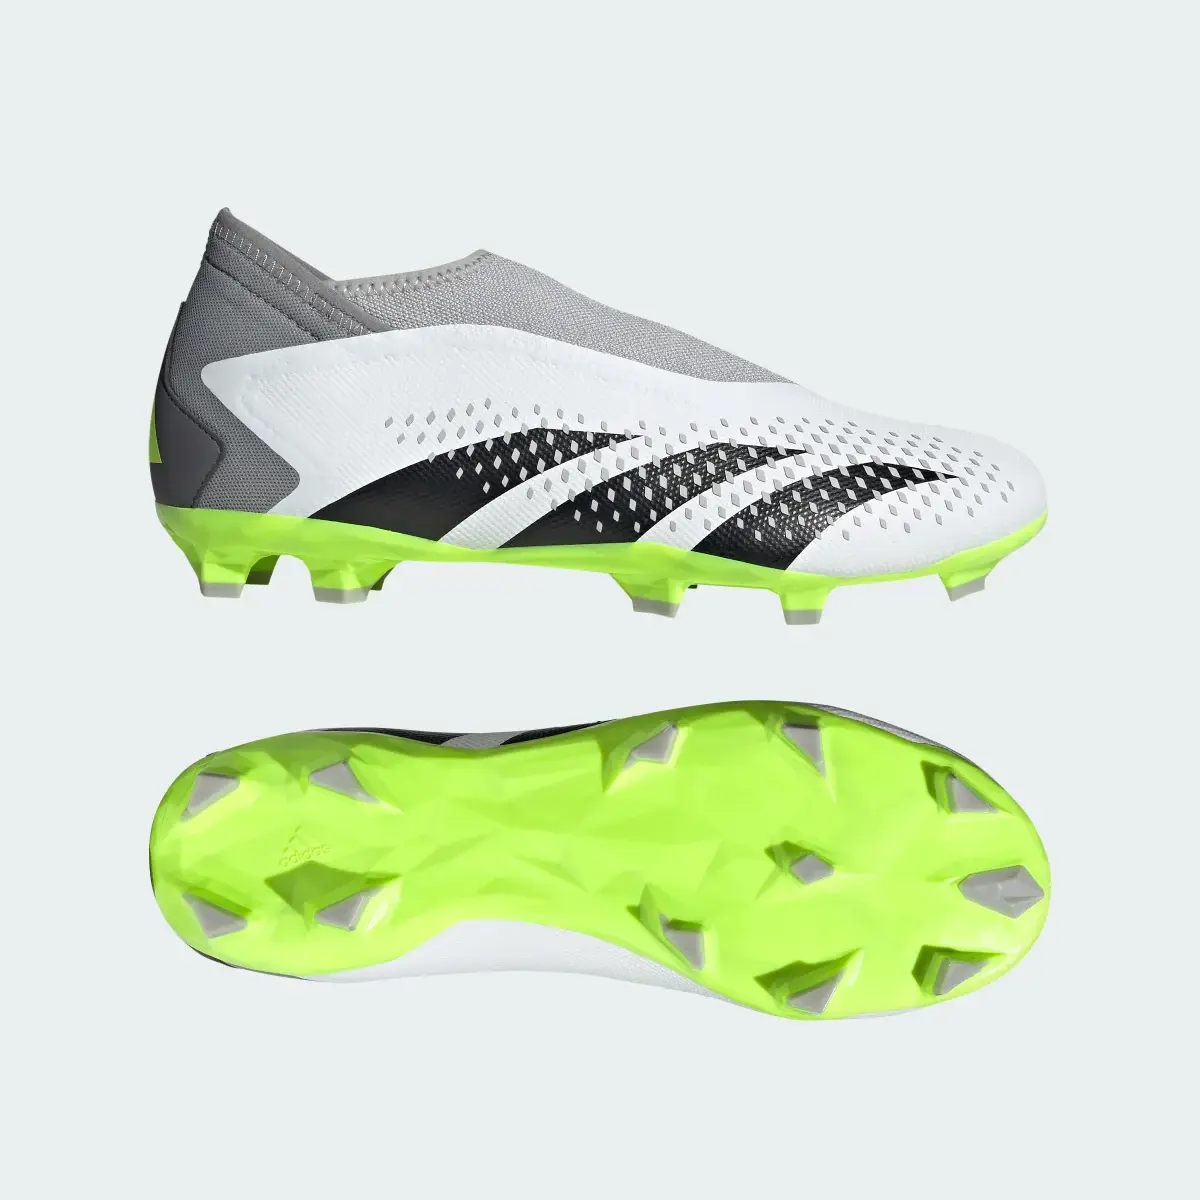 Adidas Predator Accuracy.3 Laceless Firm Ground Cleats. 1